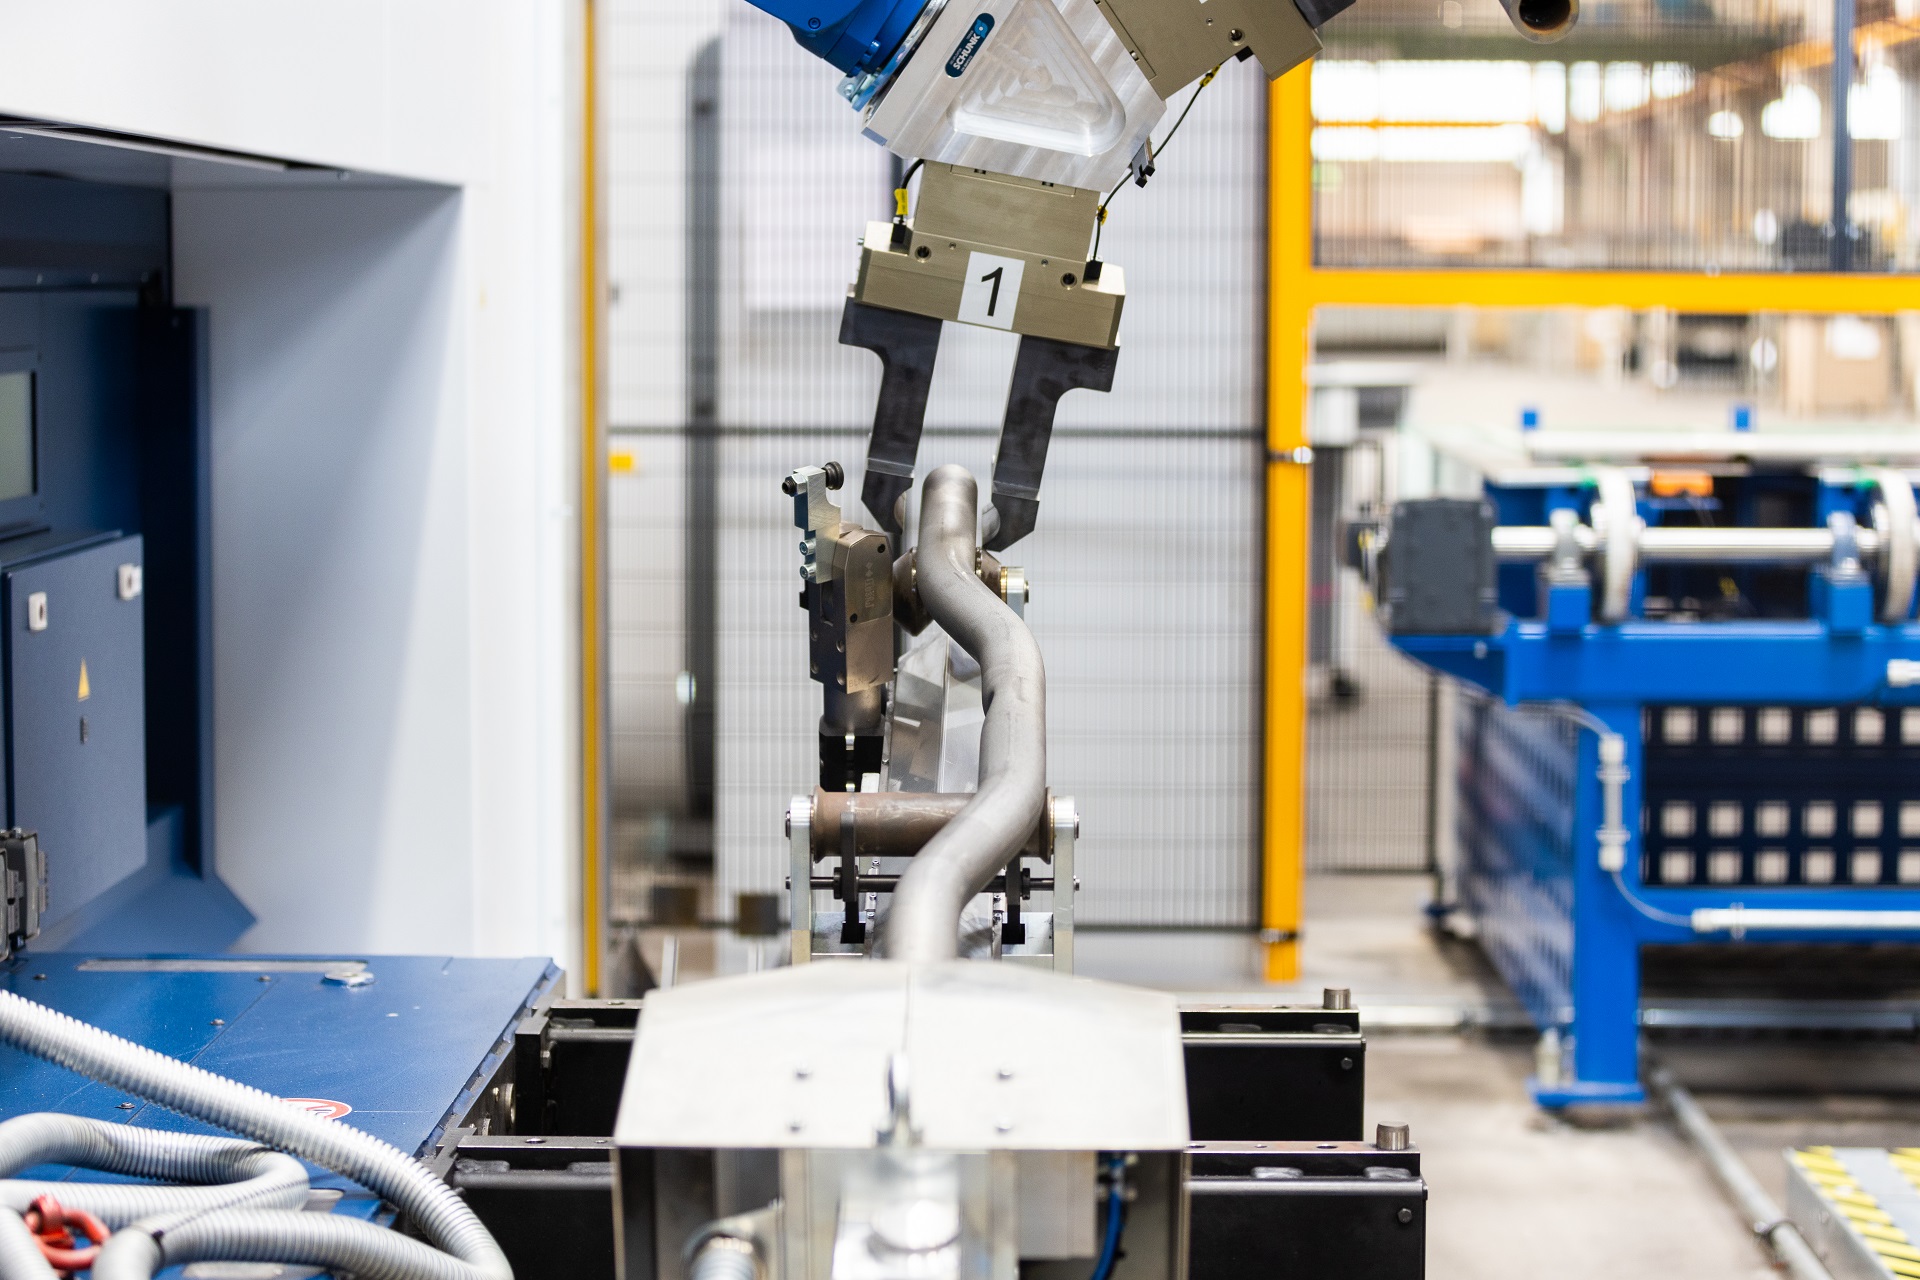 The systems in the machine network are operated automatically by a robot system that transports the parts automatically from one processing step to the next. © Trumpf